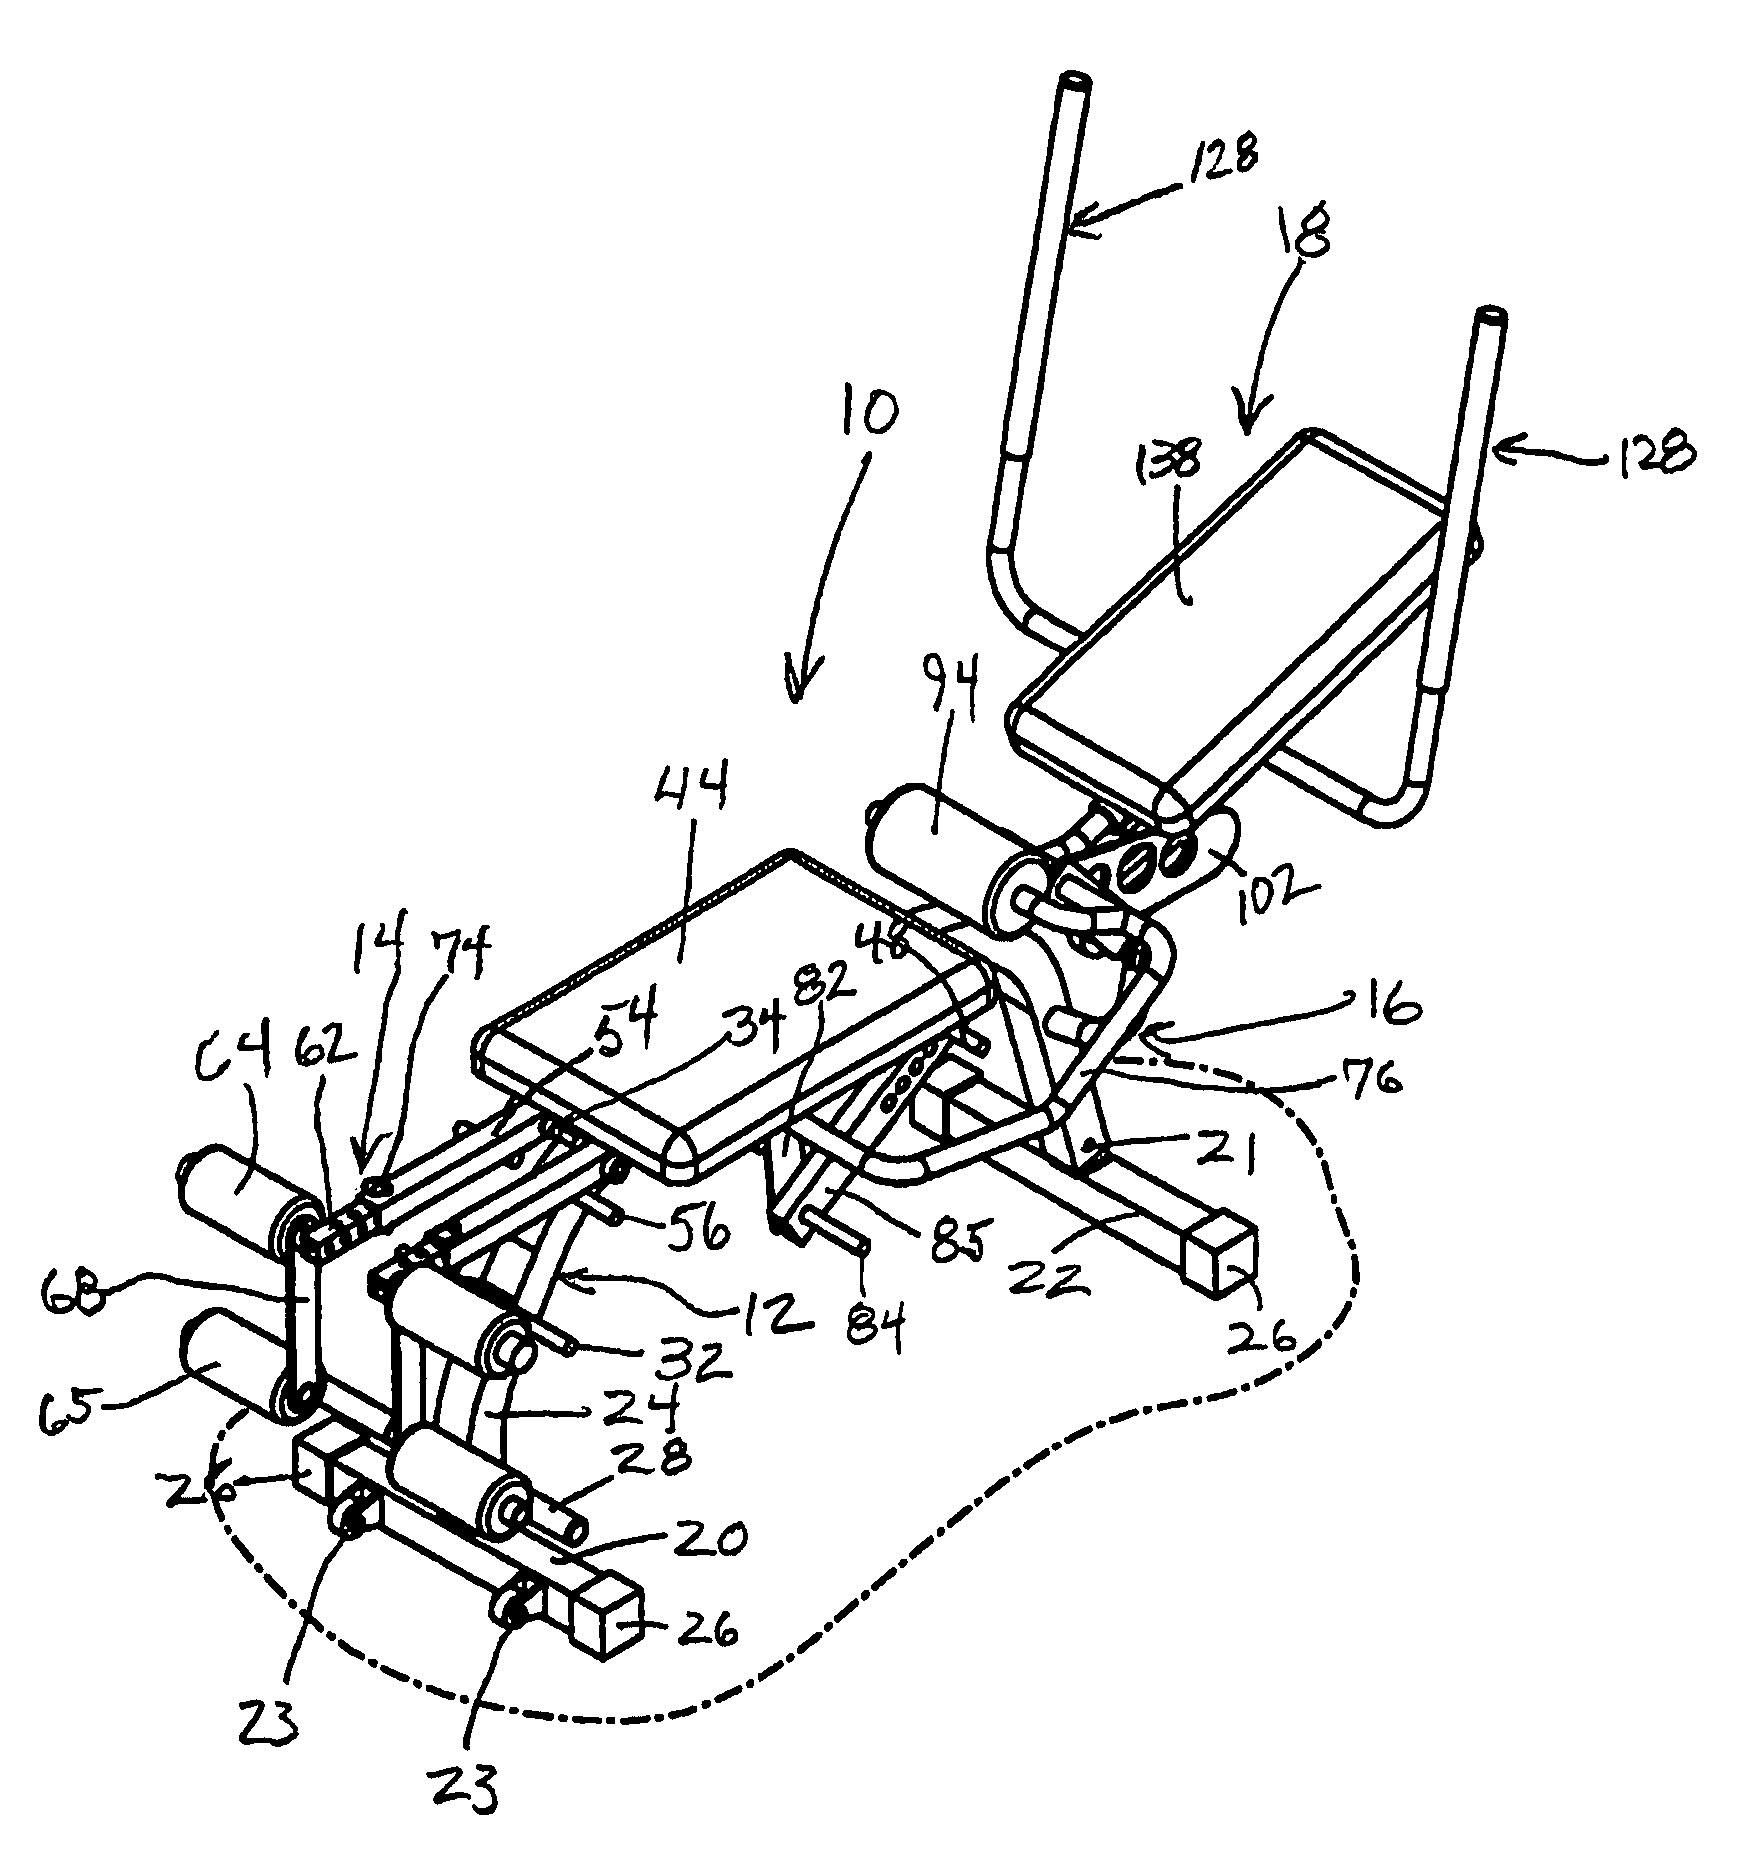 Exercise machine with compound abdominal movement